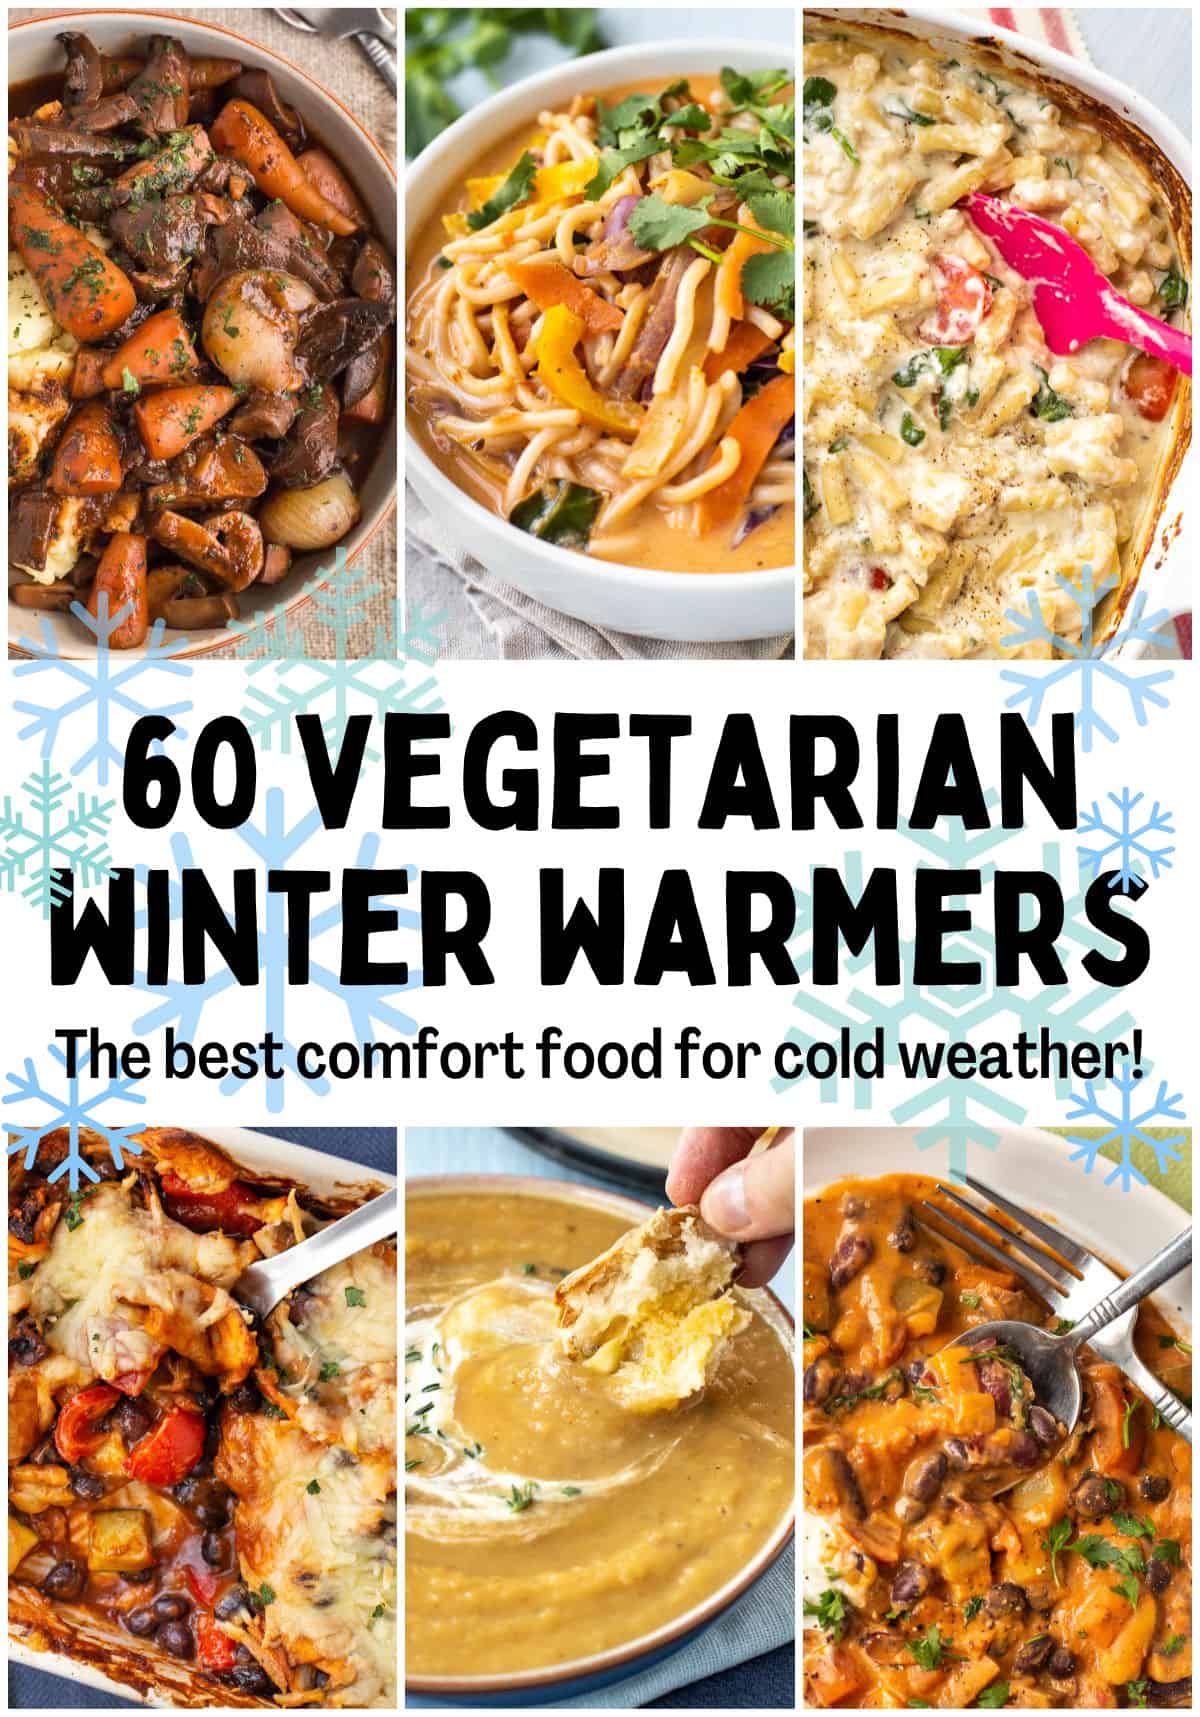 Collage showing vegetarian winter warmer recipes with text overlay.